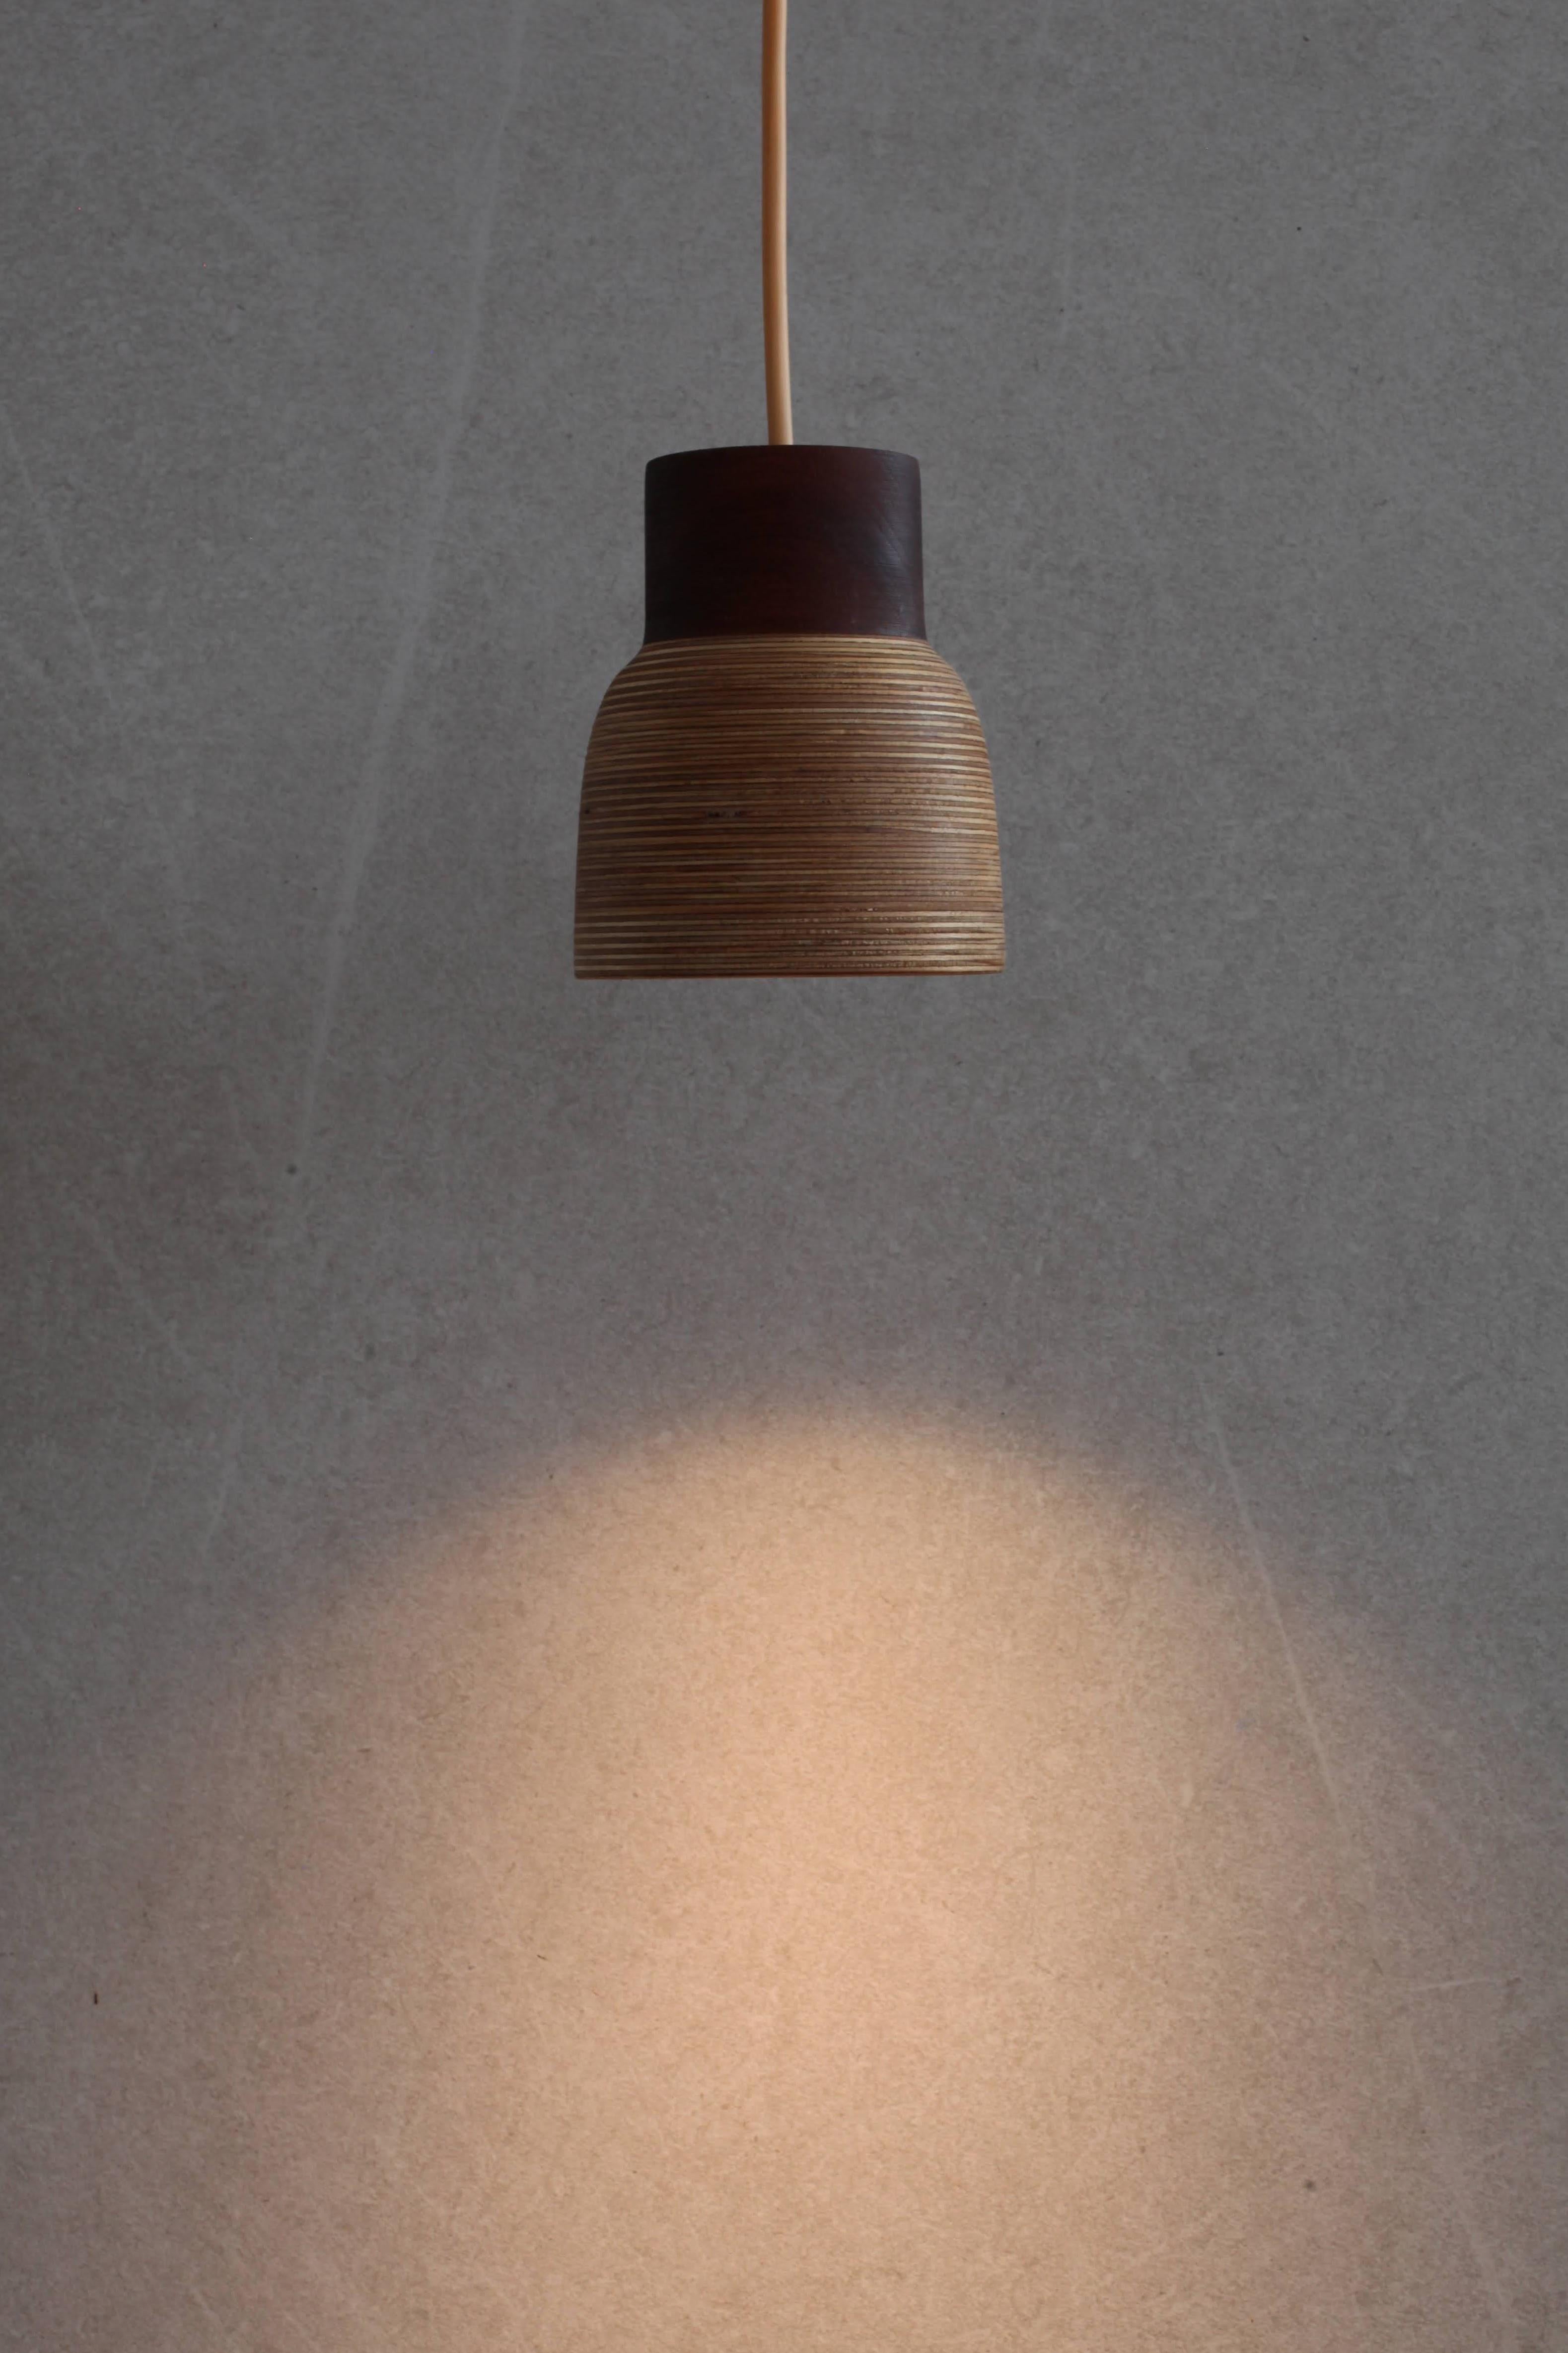 The Nutshell pendant, similar to the Nut Husk, is made from colourful layers of sustainable Baltic Birch ply with a cylinder of richly dark brown sapele wood on top. The pendant is available in plain wood or with a geometric style section of white.